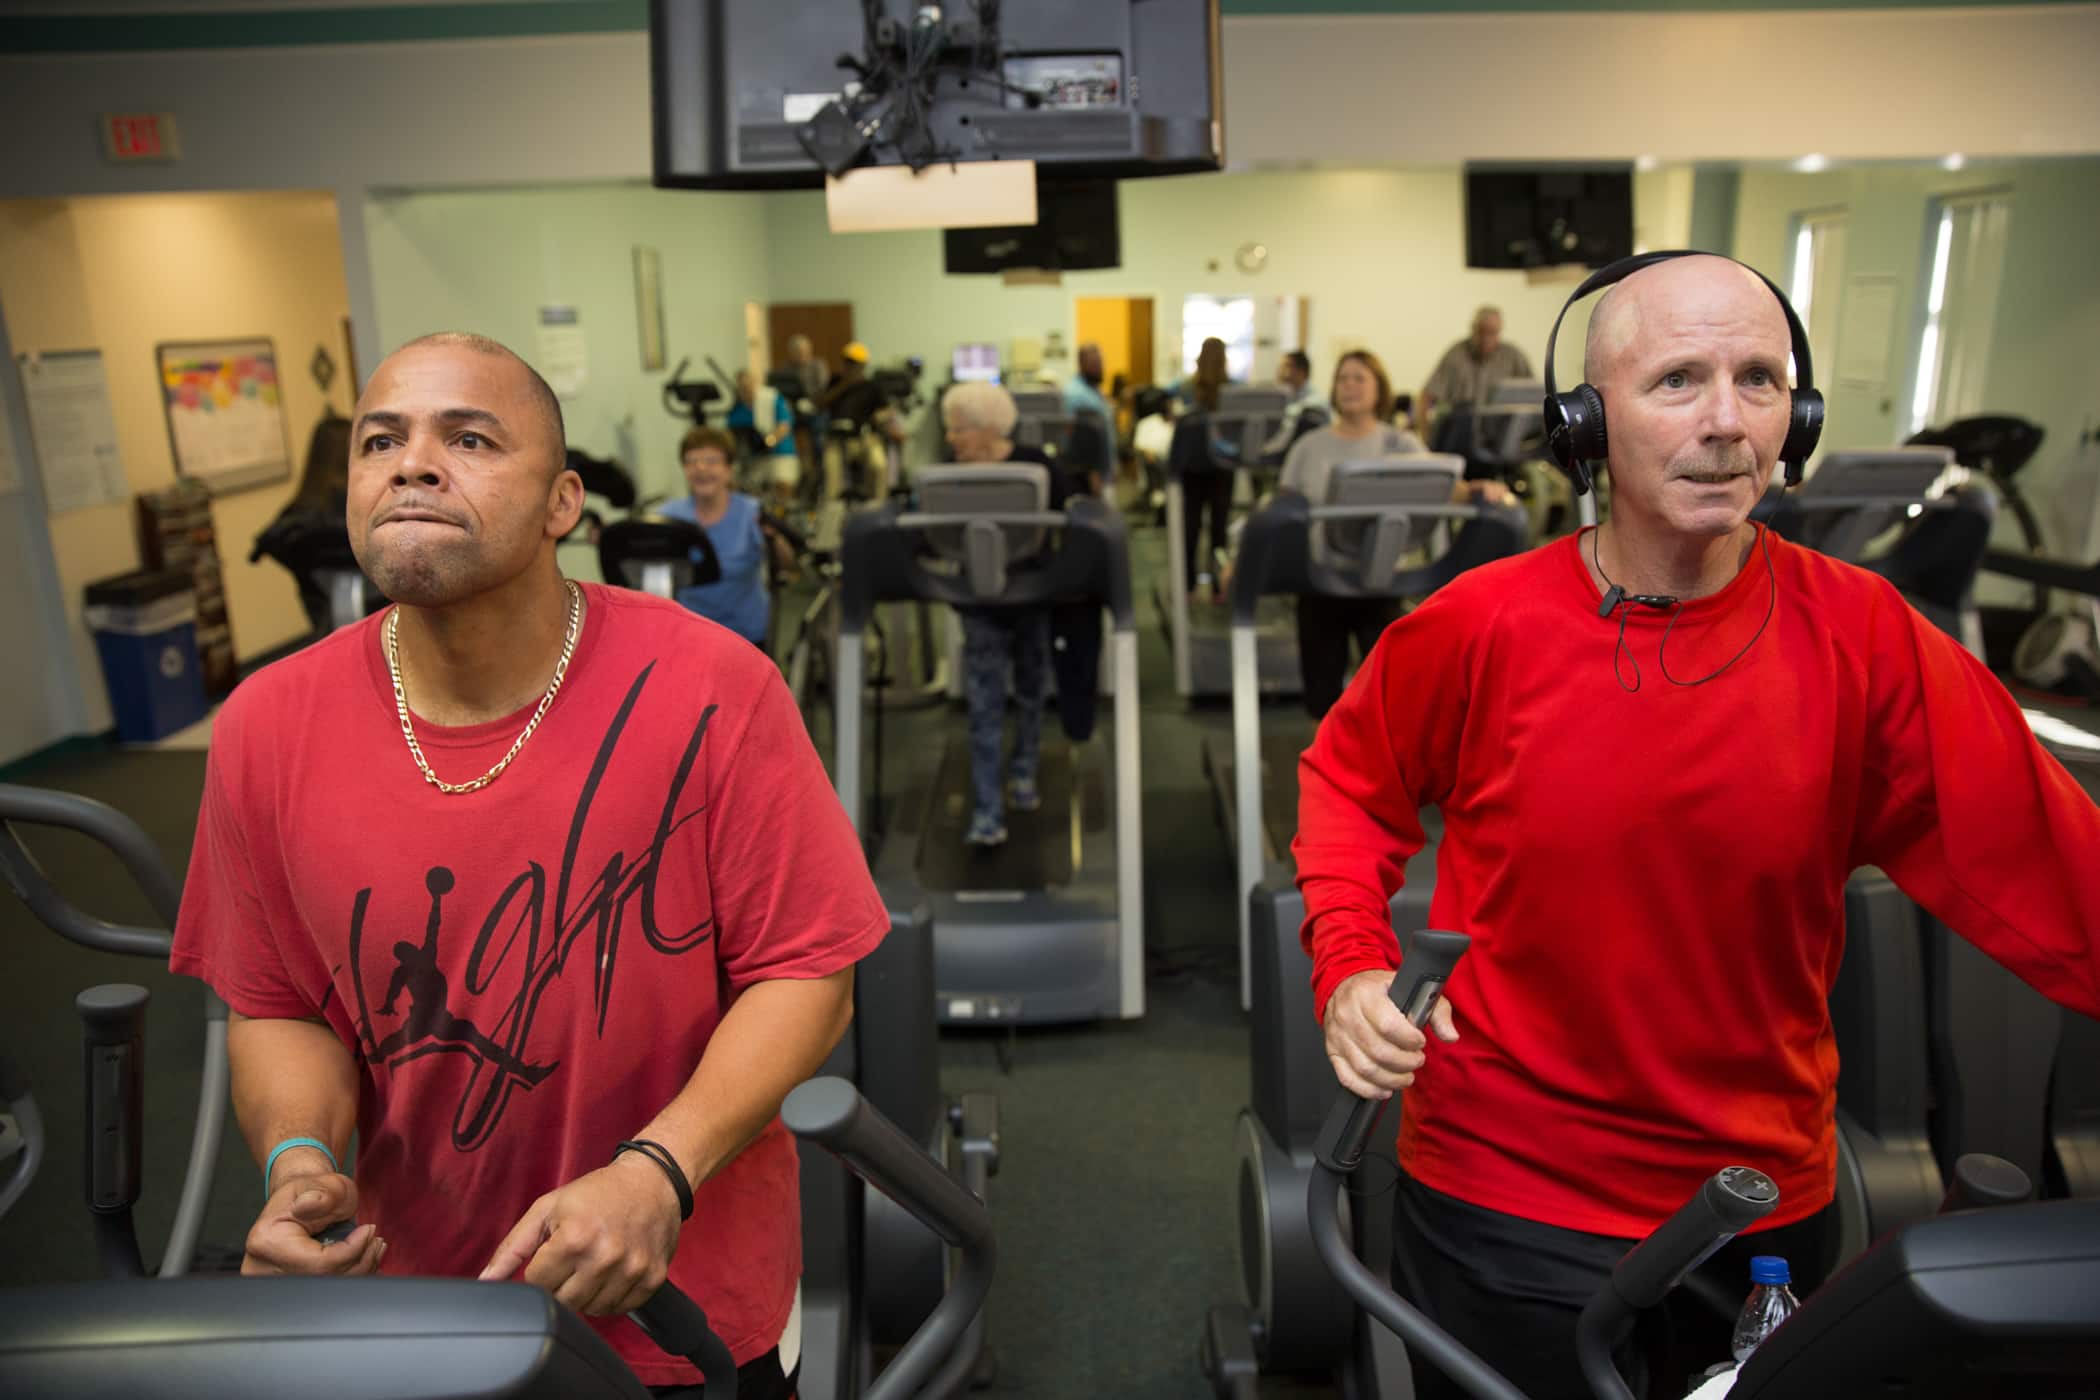 Two men run on exercise machines at an ECU Health Wellness Center.